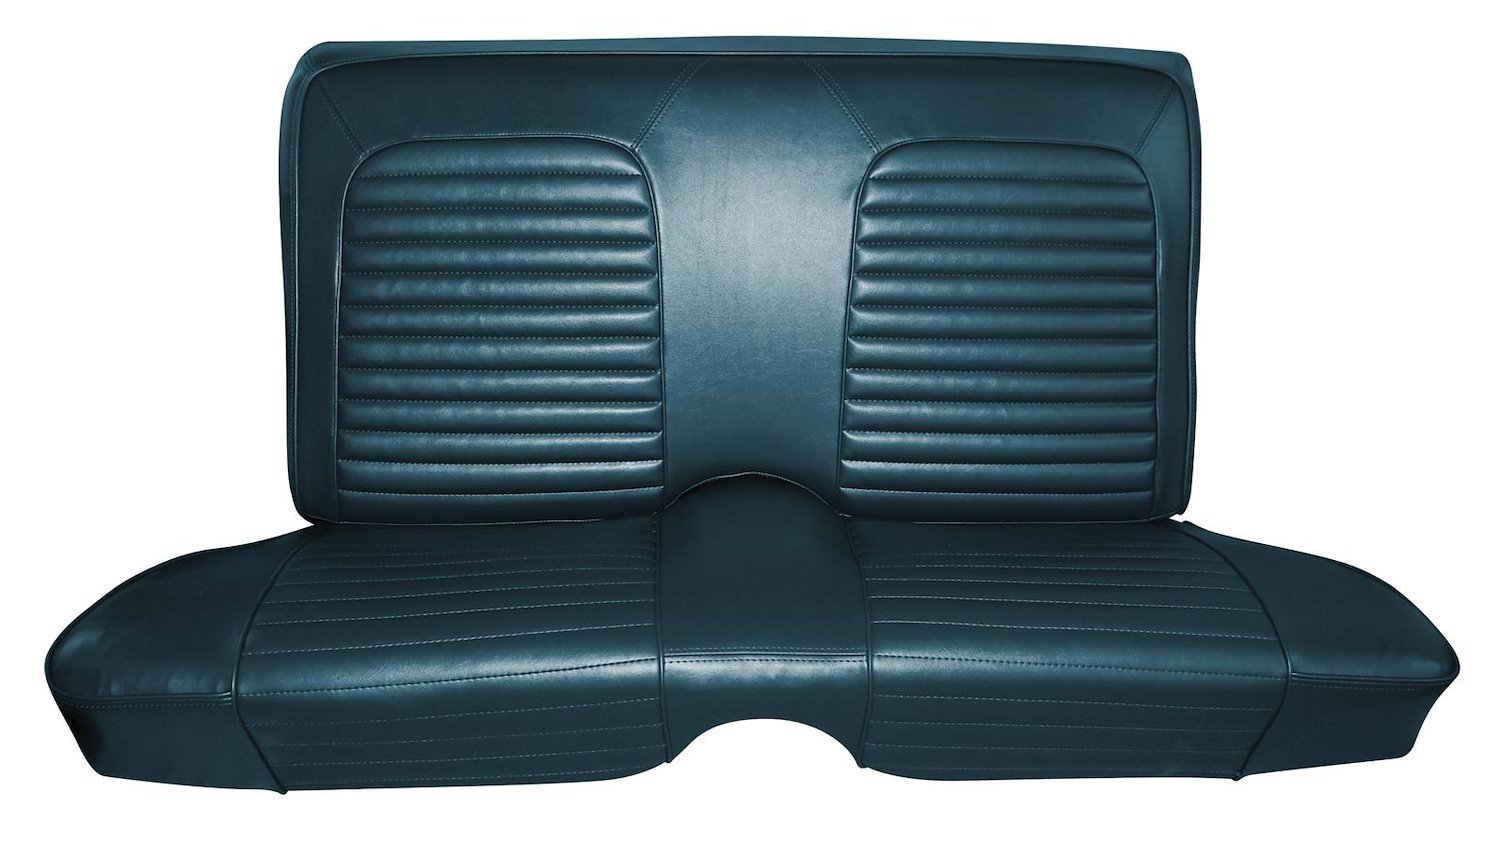 1962 Chevrolet Impala 2-Door Coupe Standard and Super Sport Interior Rear Bench Seat Upholstery Set